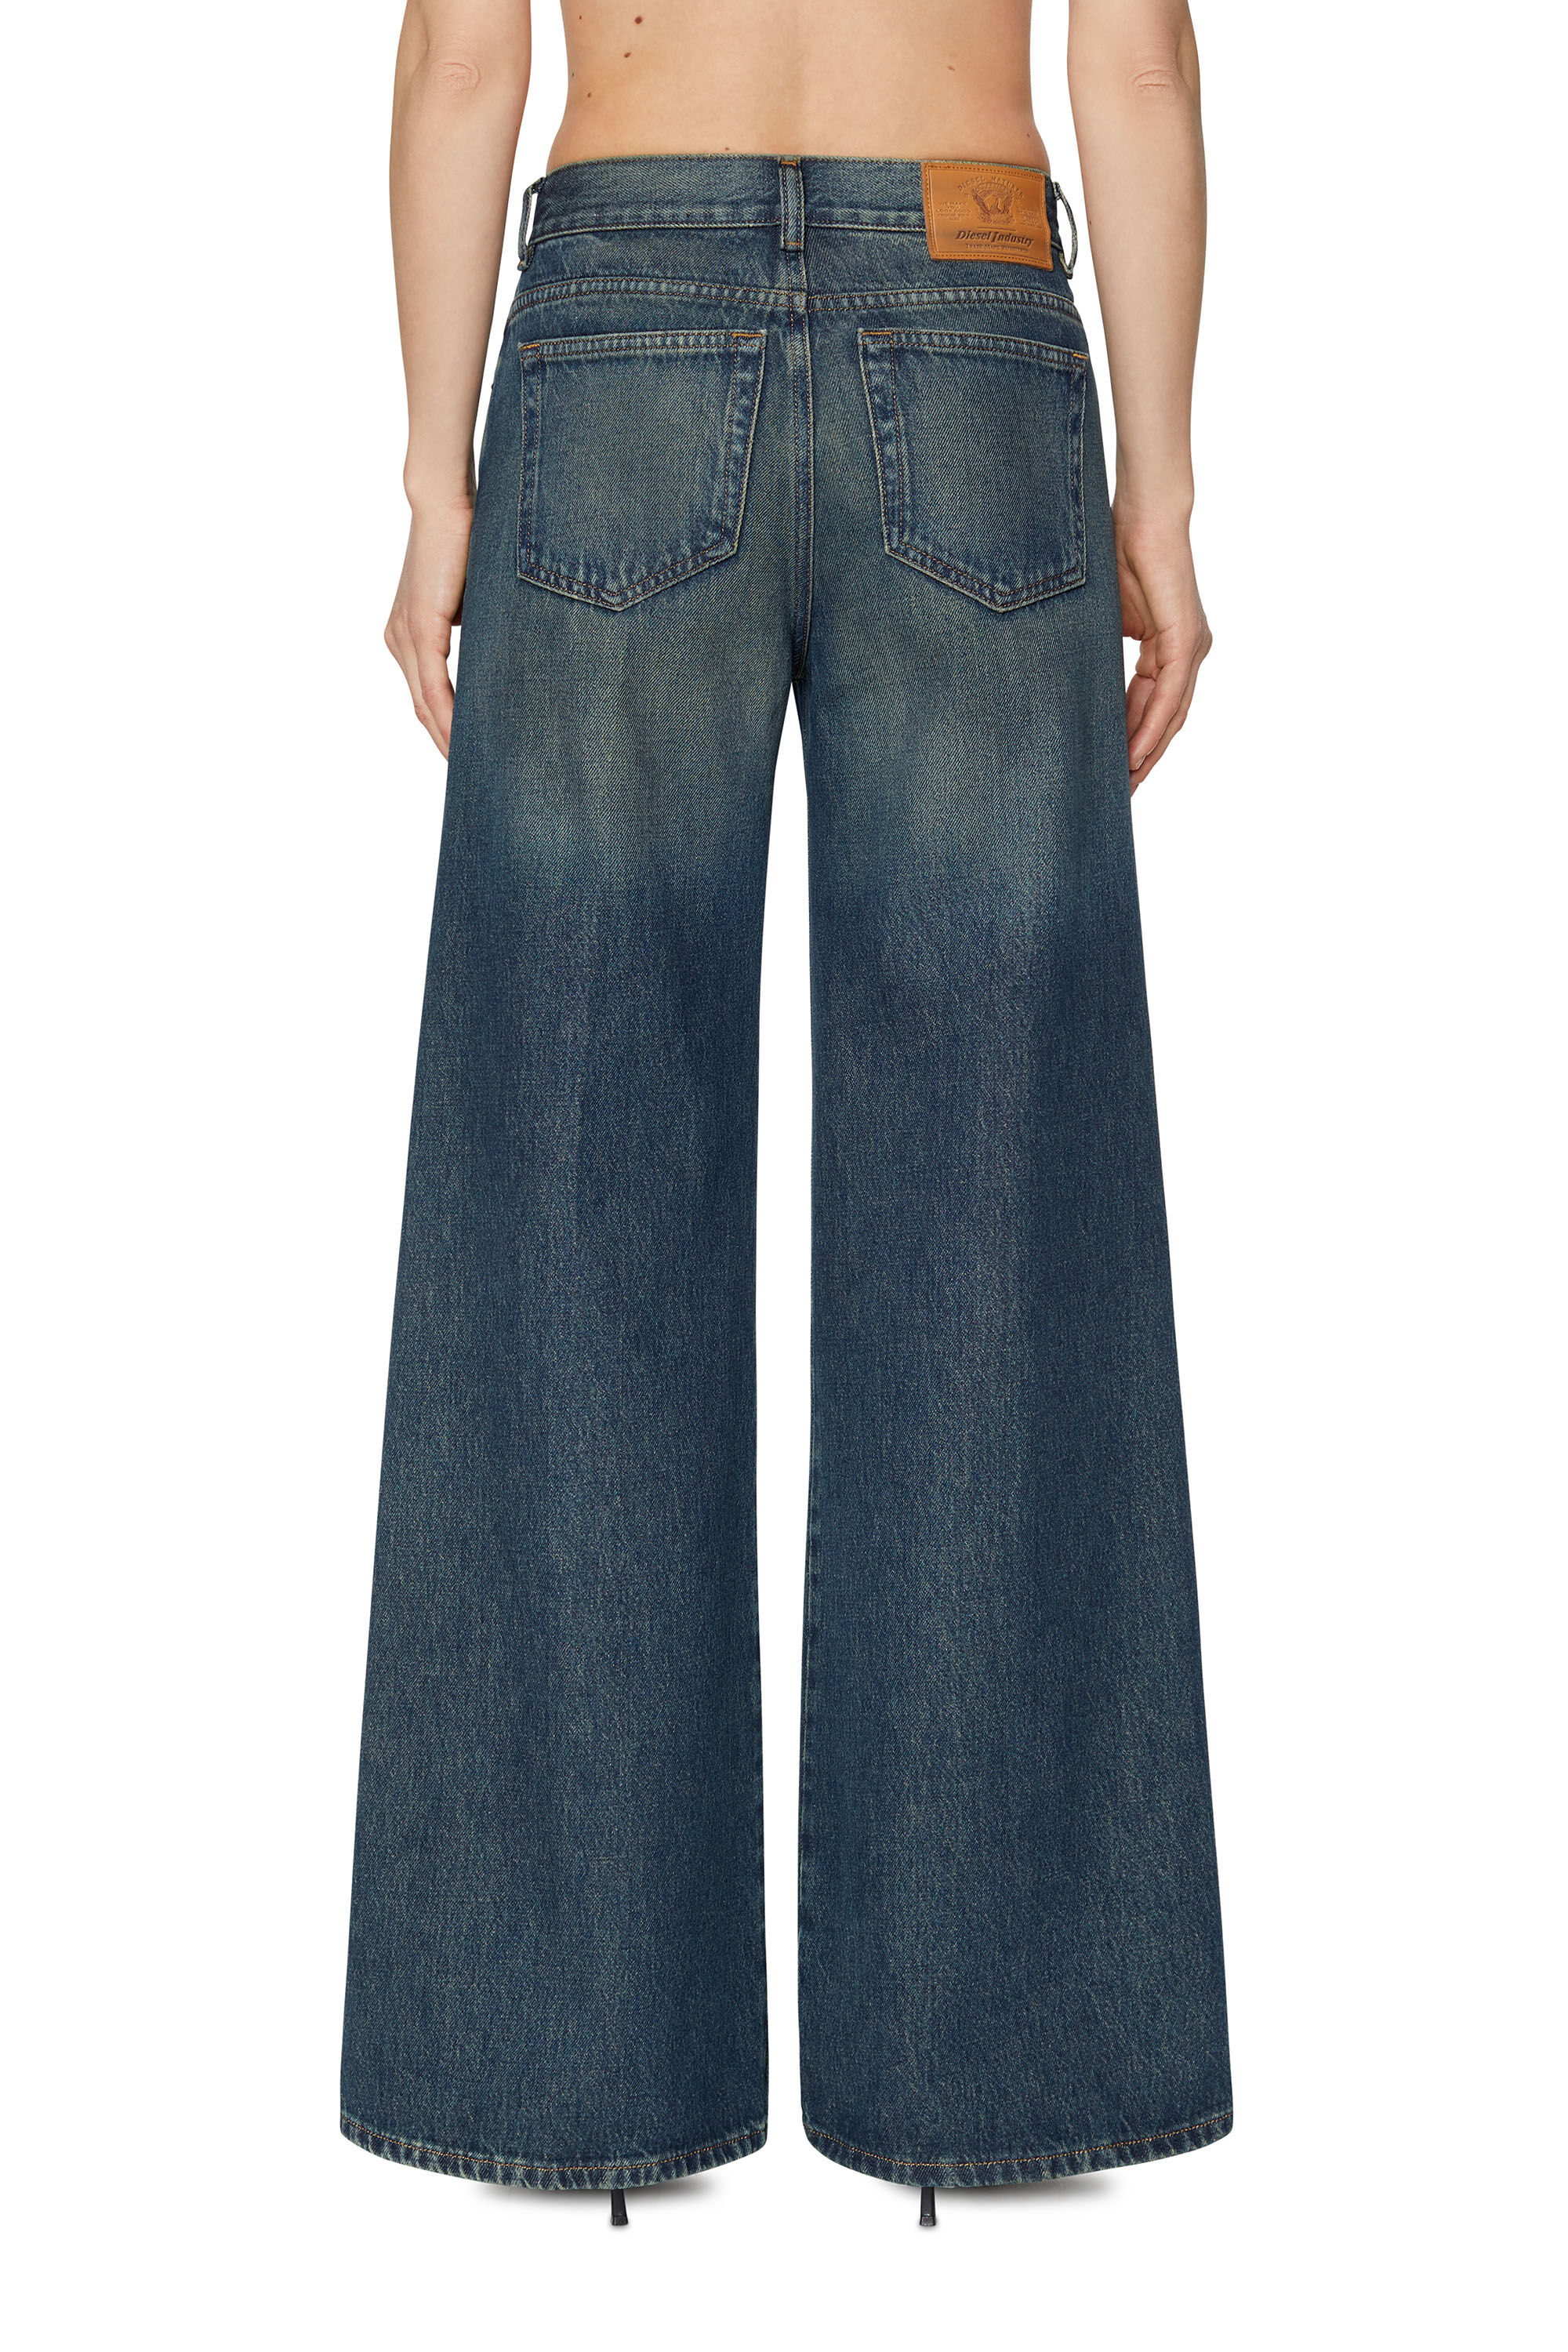 Diesel - 1978 09C04 Bootcut and Flare Jeans, Dunkelblau - Image 4